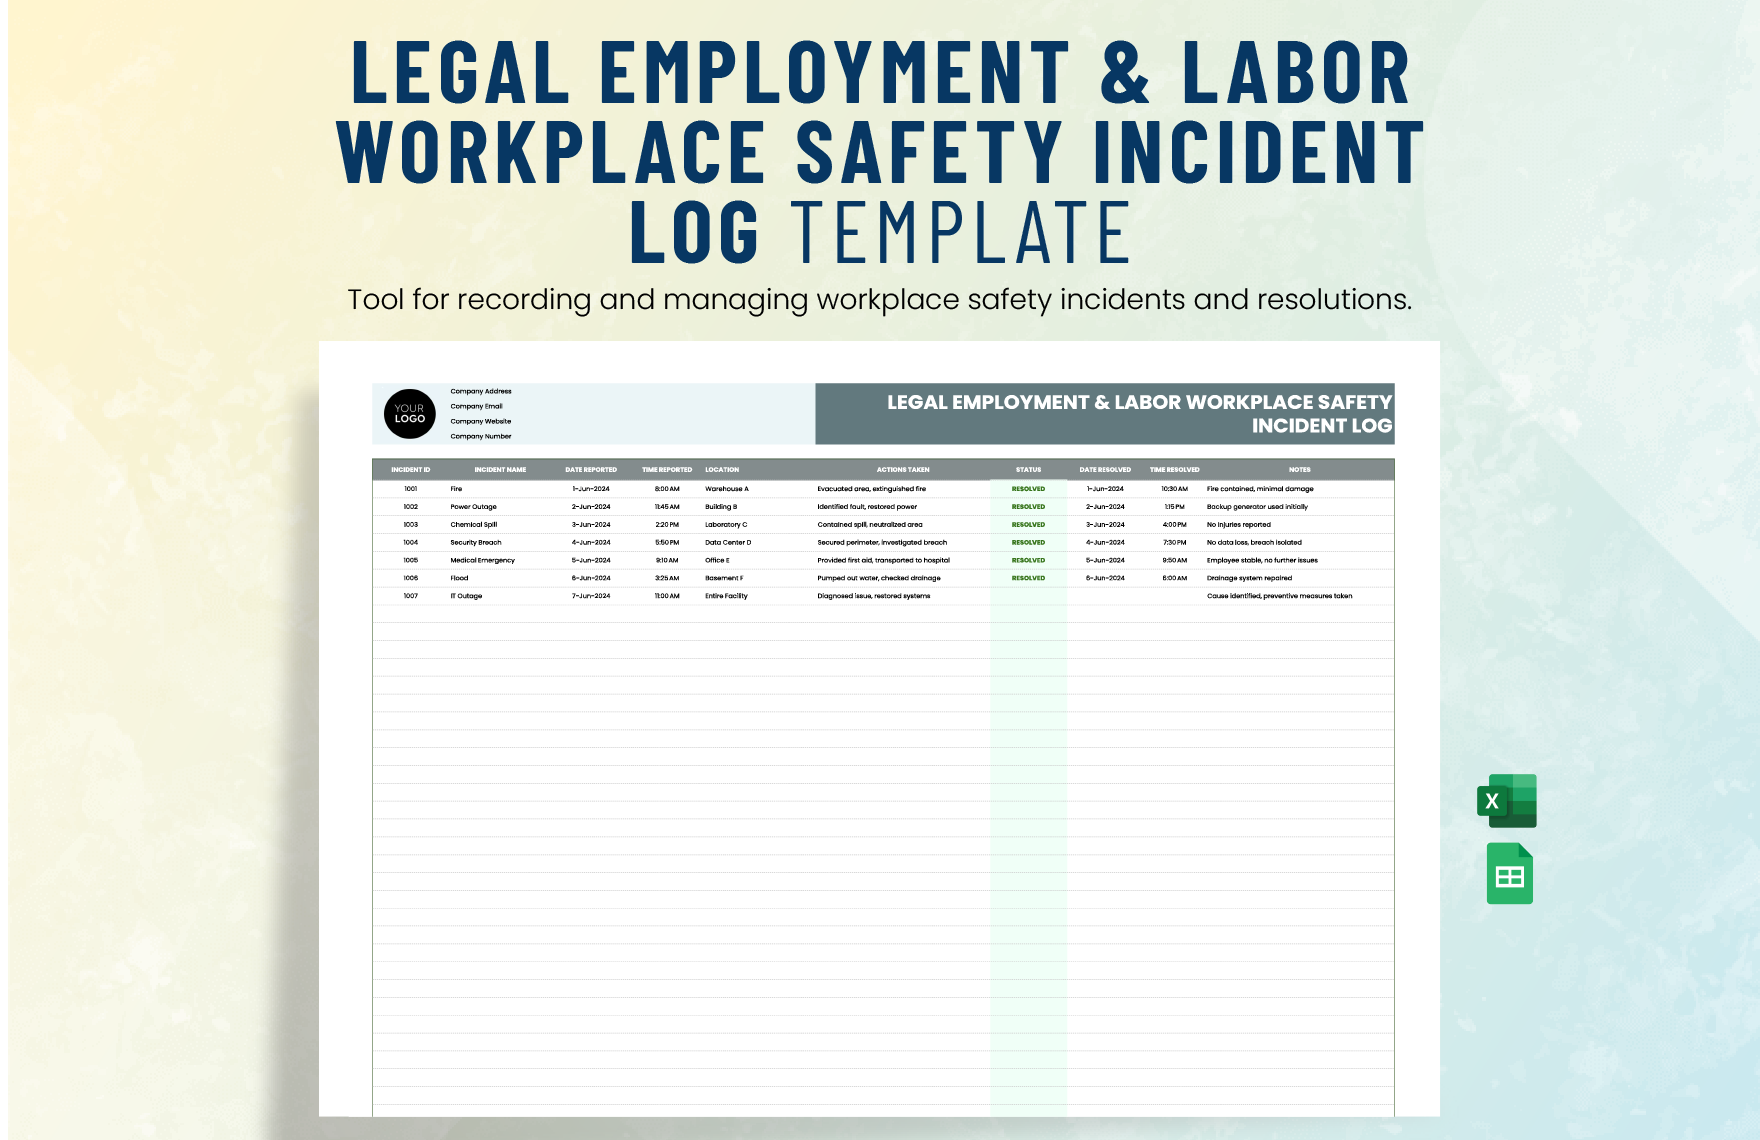 Legal Employment & Labor Workplace Safety Incident Log Template in Excel, Google Sheets